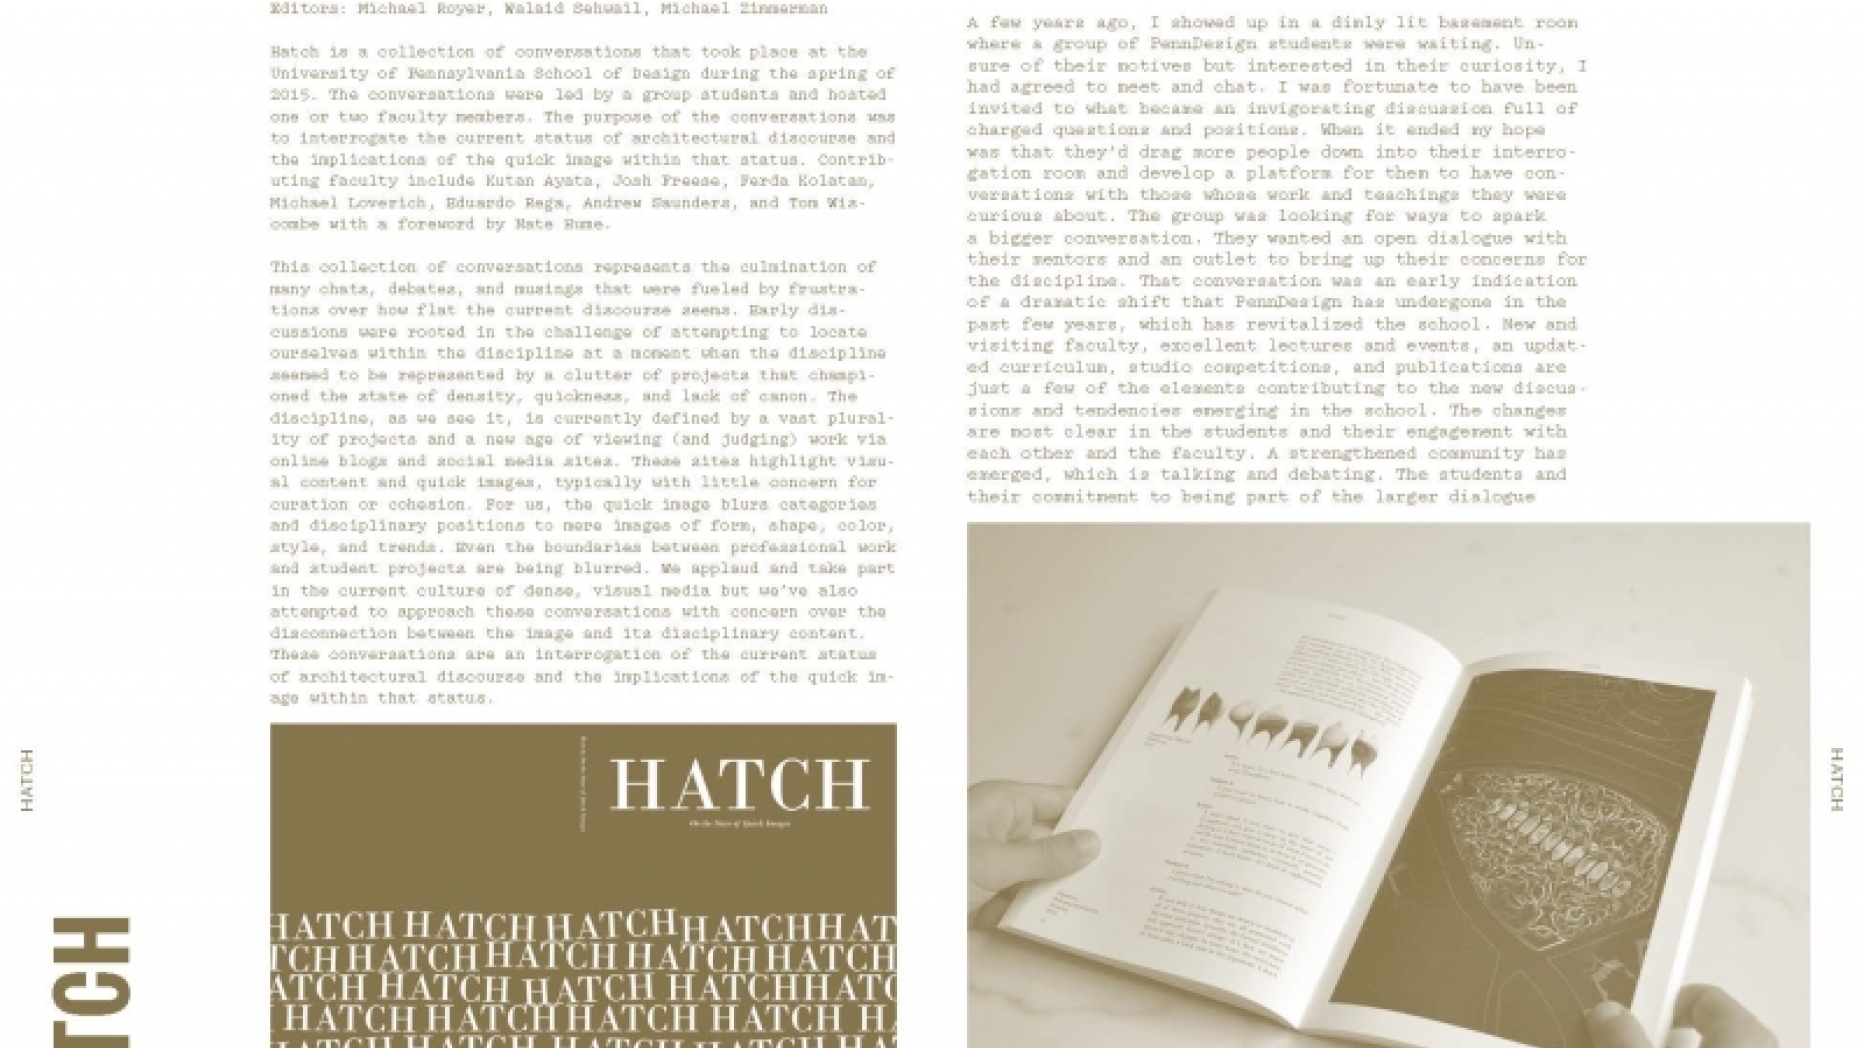 Sample pages from Pressing Matter 5 featuring HATCH